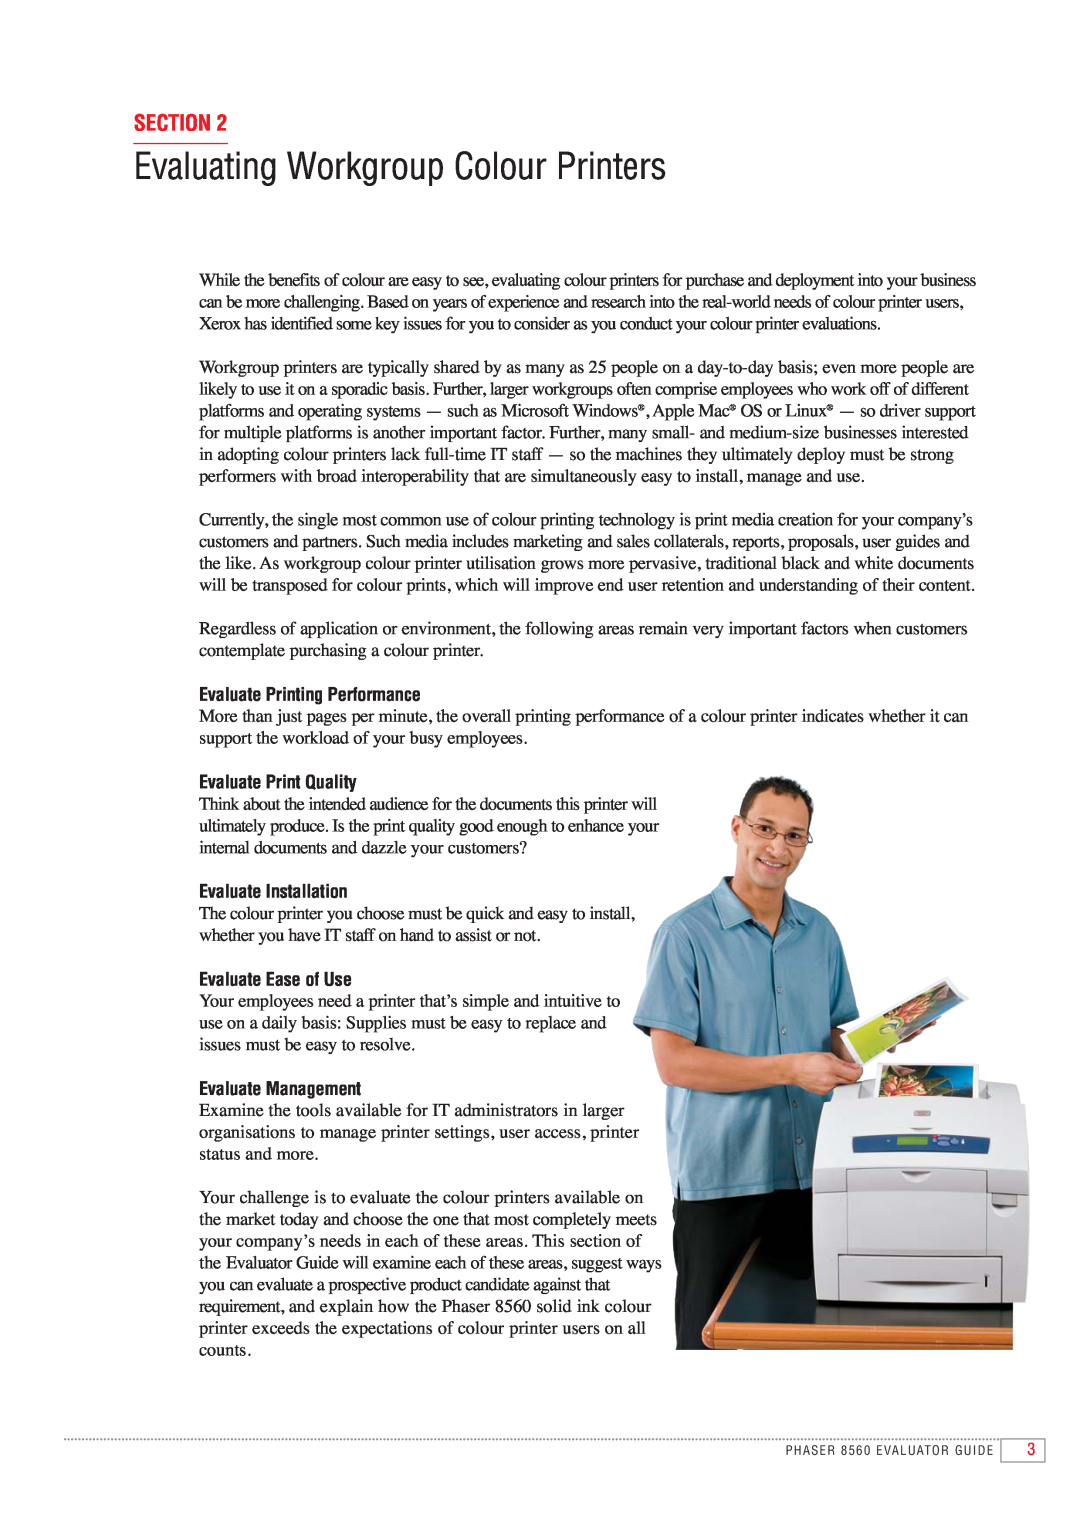 Xerox 8560 manual Evaluating Workgroup Colour Printers, Section, Evaluate Printing Performance, Evaluate Print Quality 